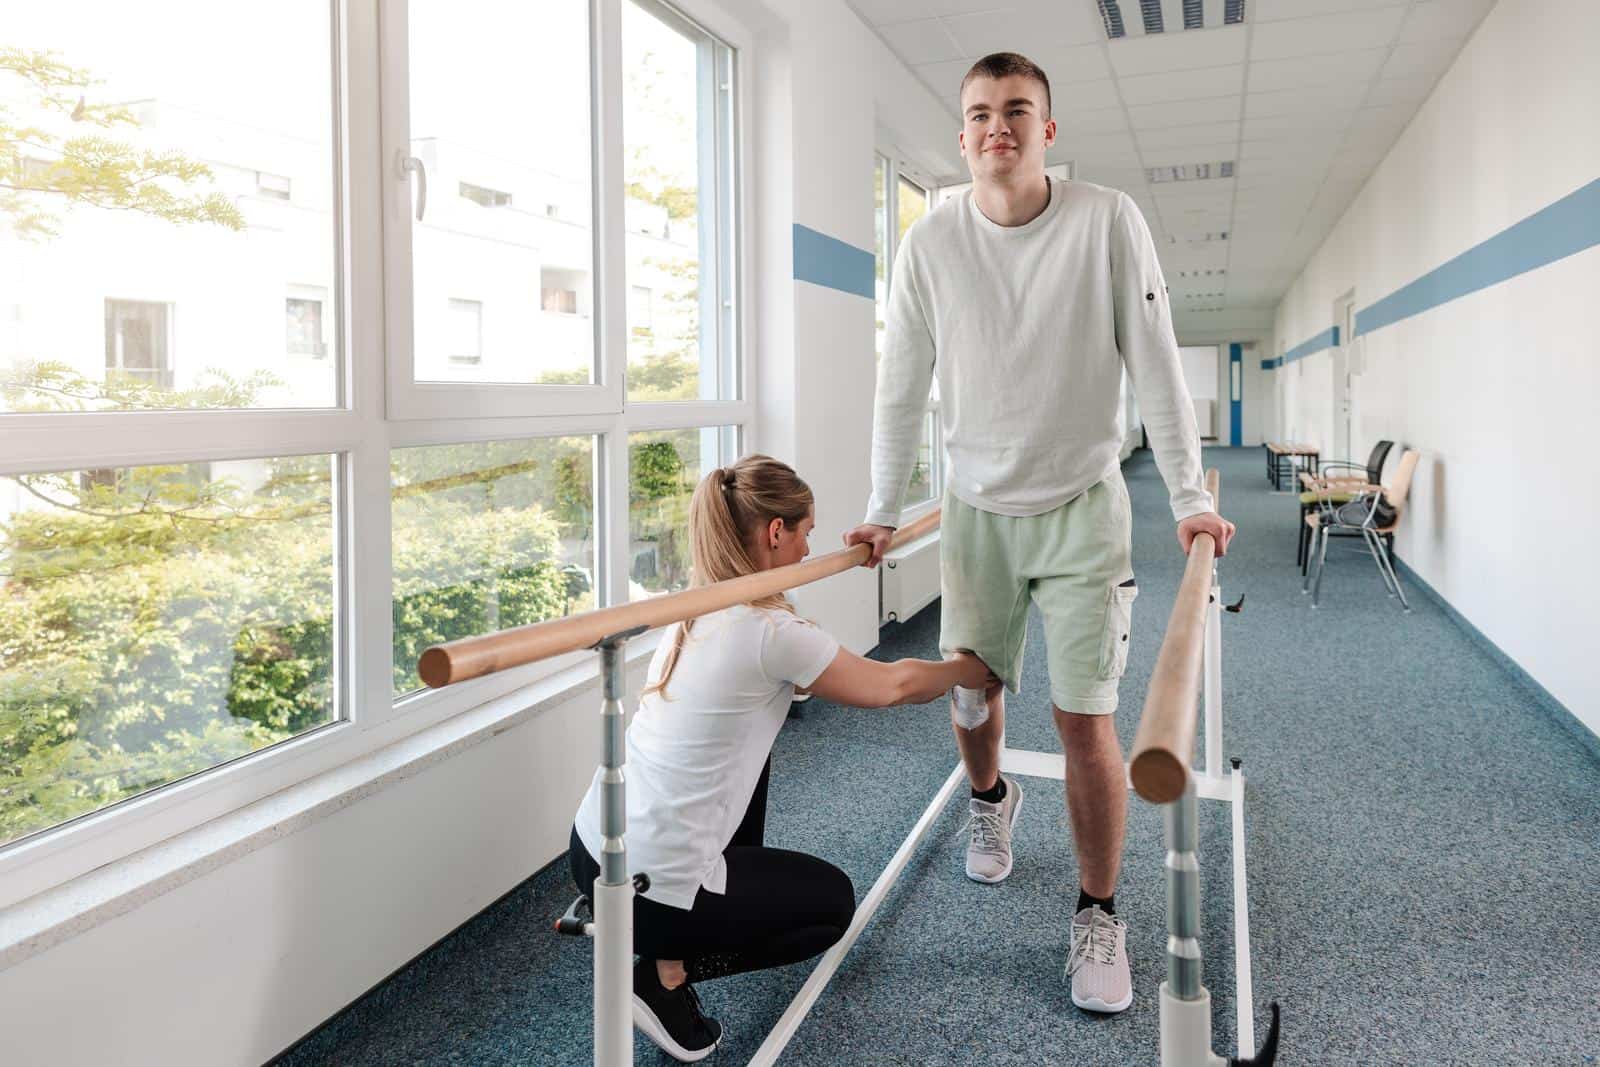 A young man is in a walking rehabilitation course after a sports injury on his knee.